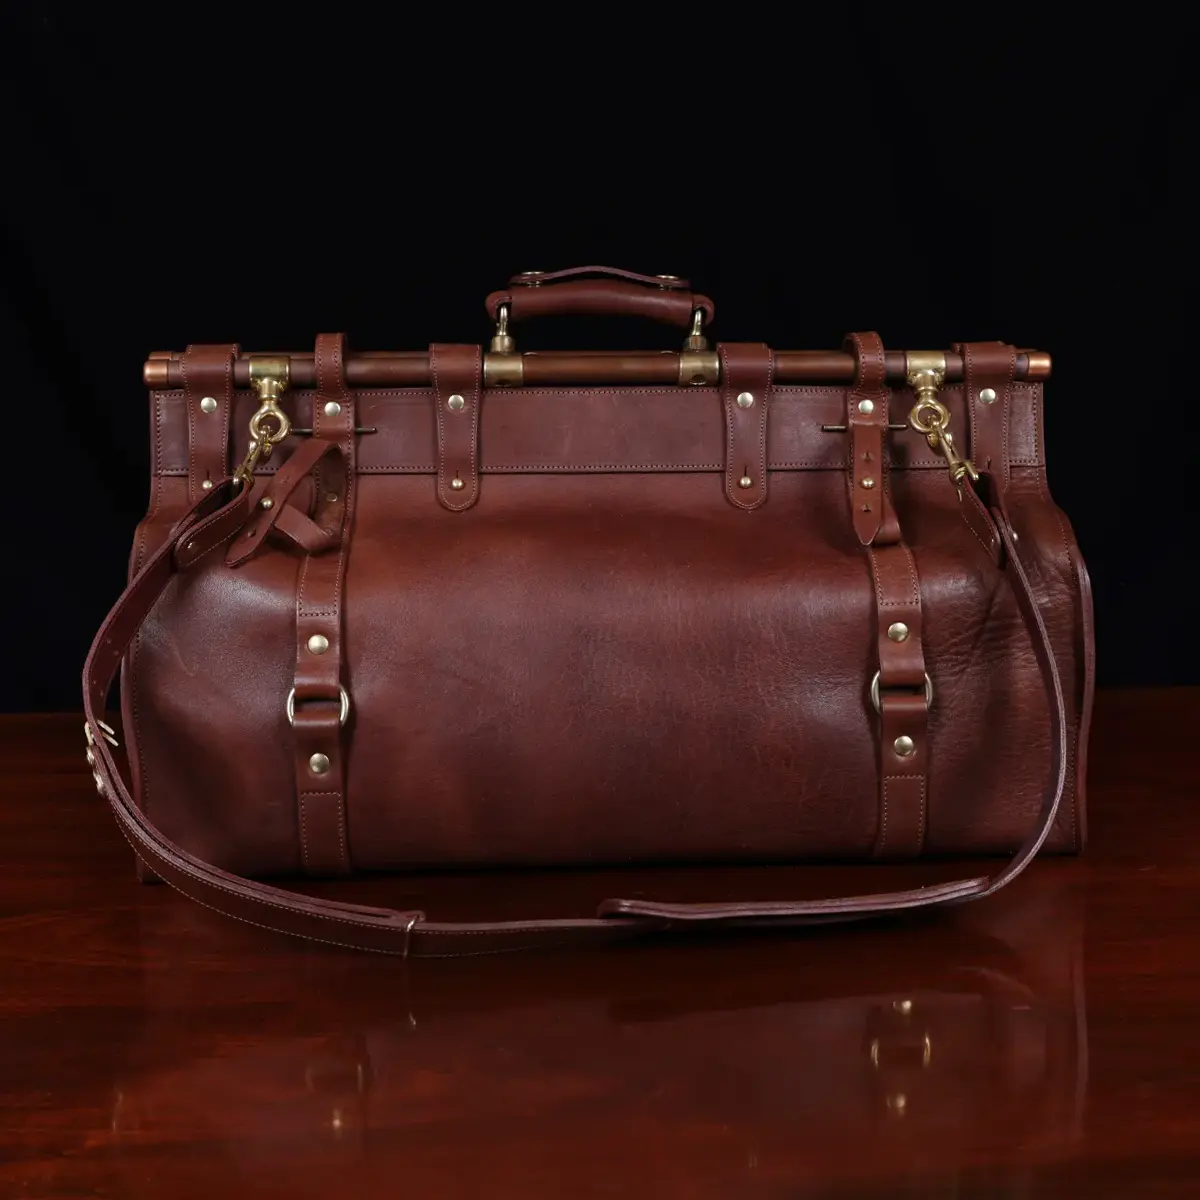 Gunnar Leather Military Style Duffle Bag » Gadget Flow